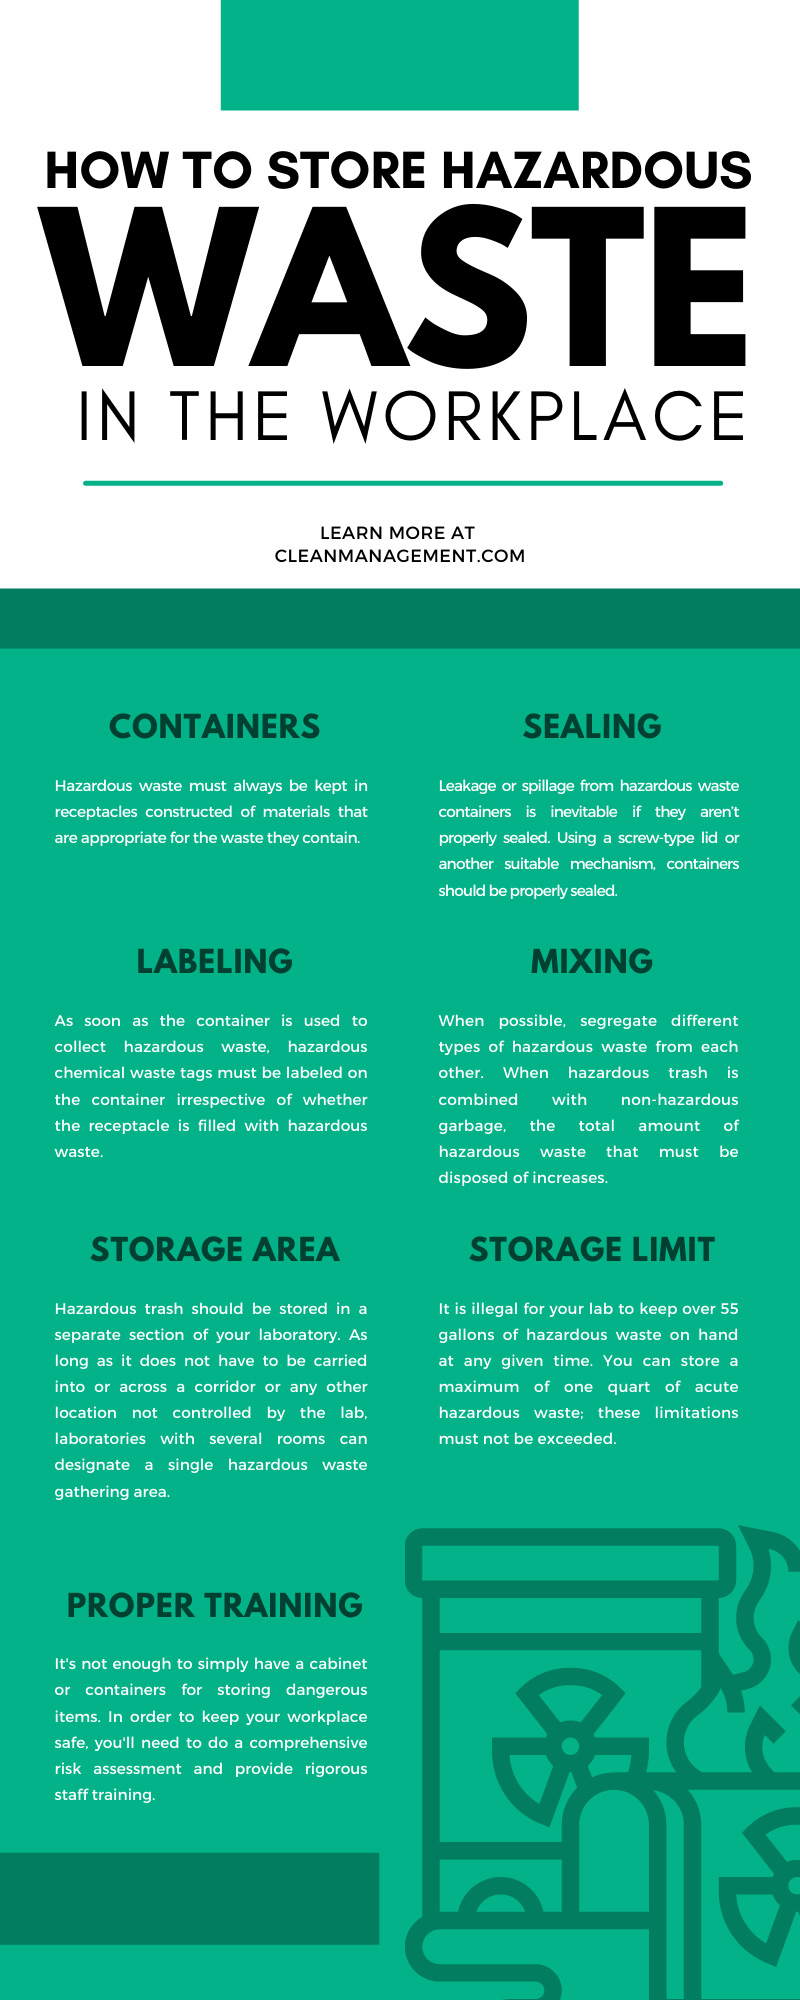 How To Store Hazardous Waste in the Workplace